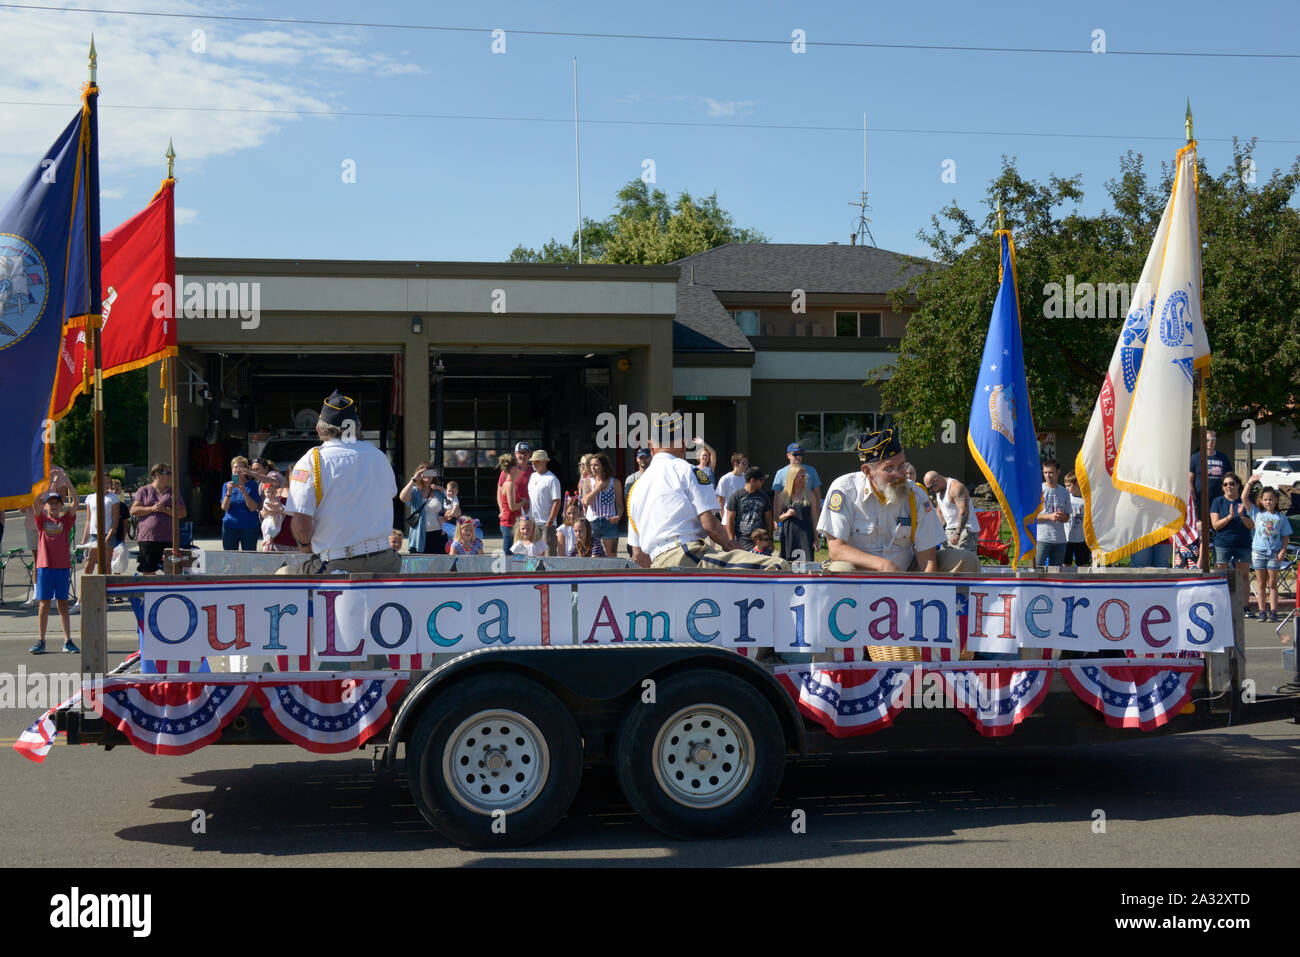 Veterans, American flags, Float, July 4, Independence Day, 4th of July